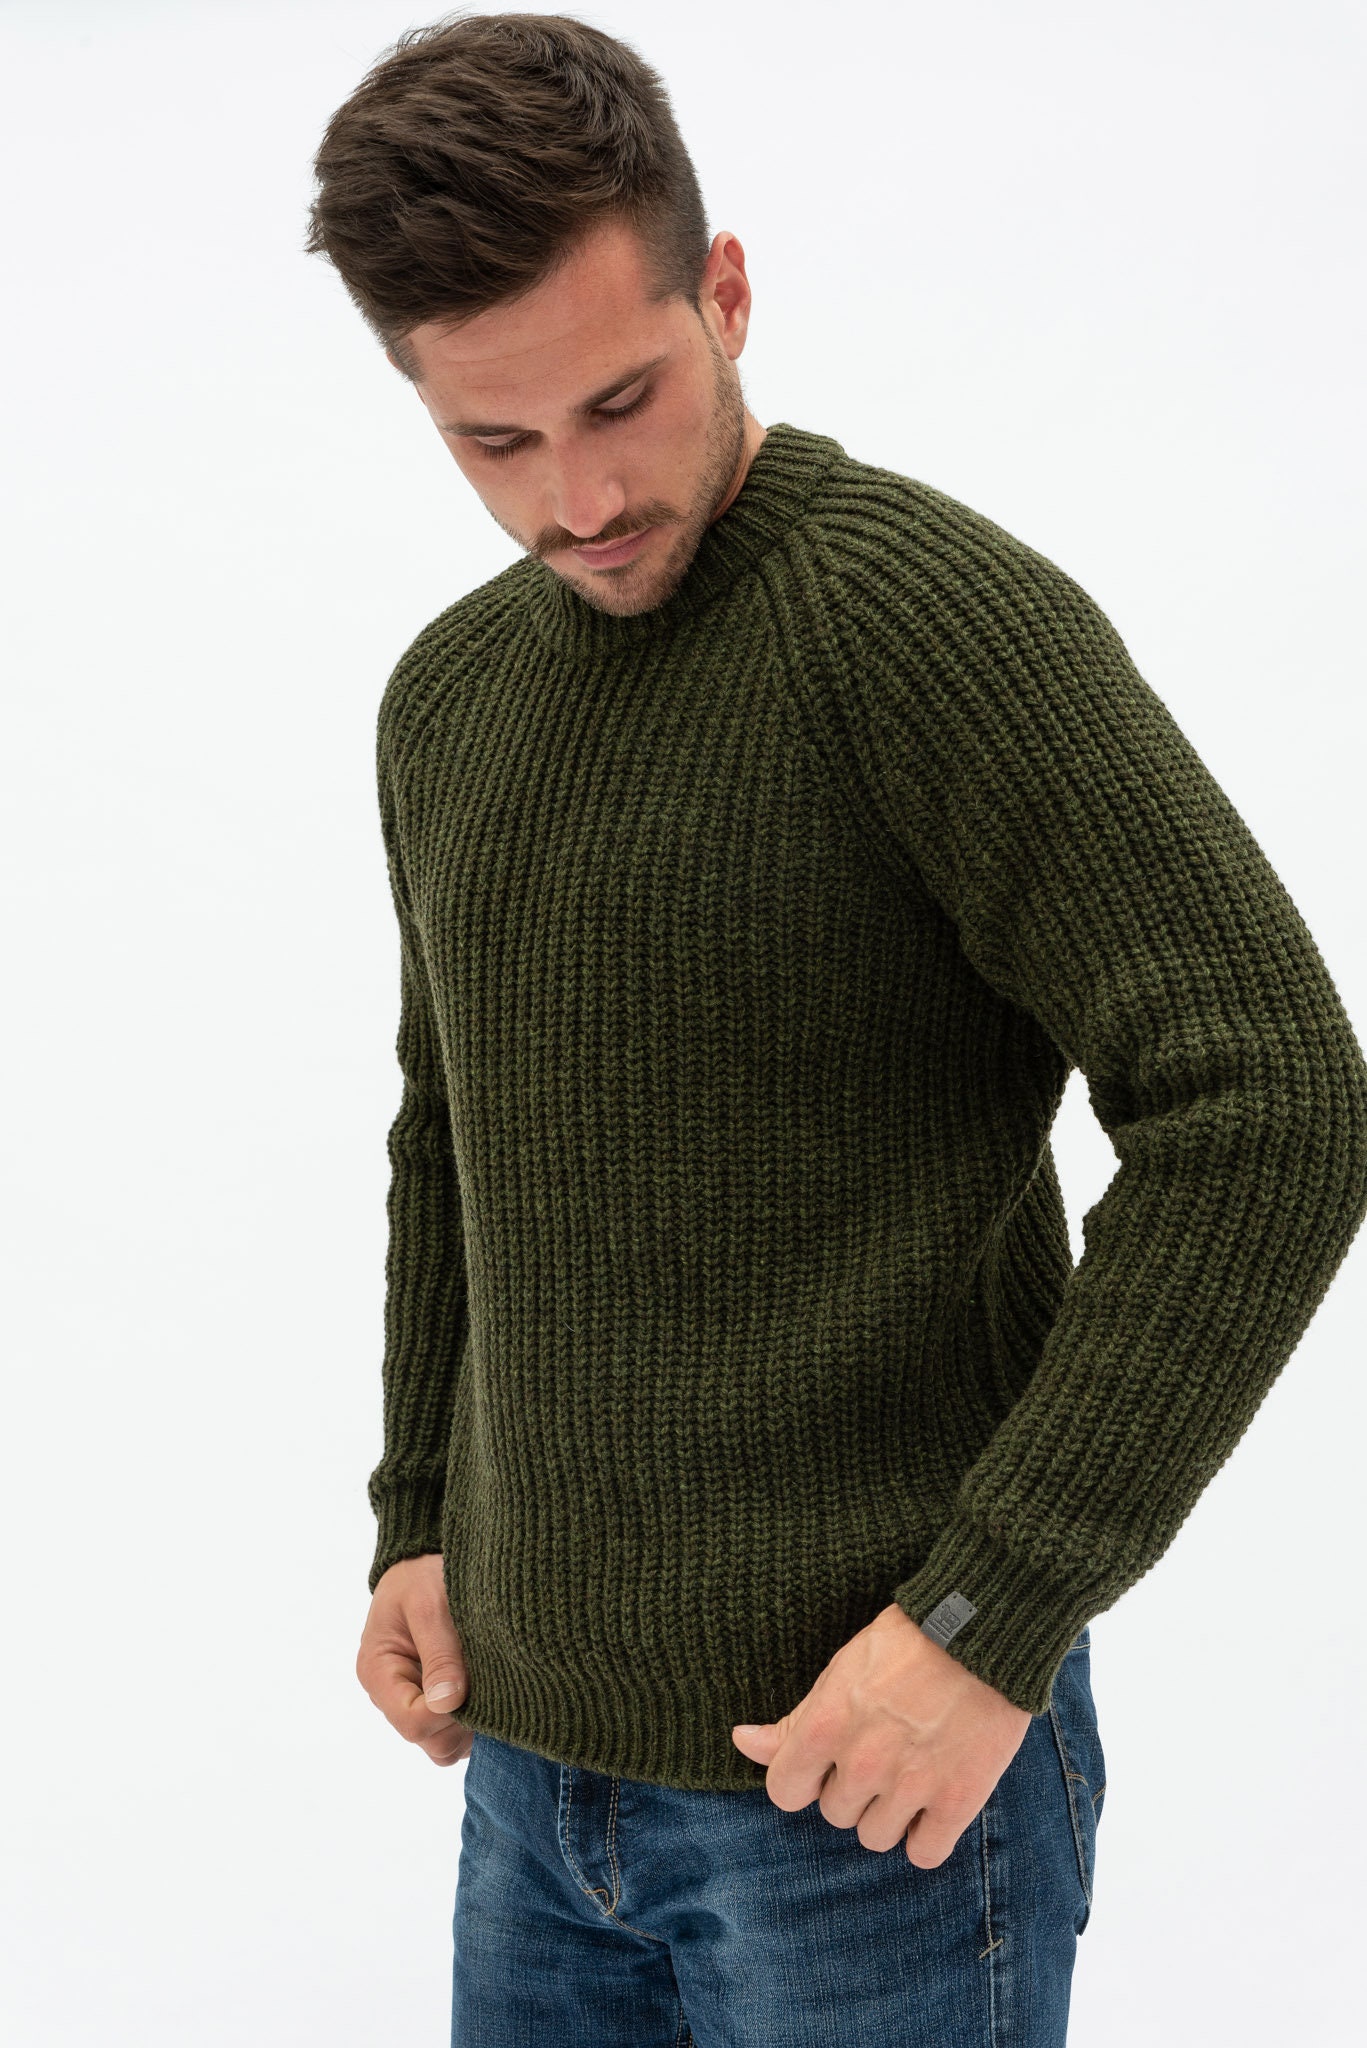 Mens Merino Wool Crew Neck Sweater Knitted Woolen Pullover - Etsy